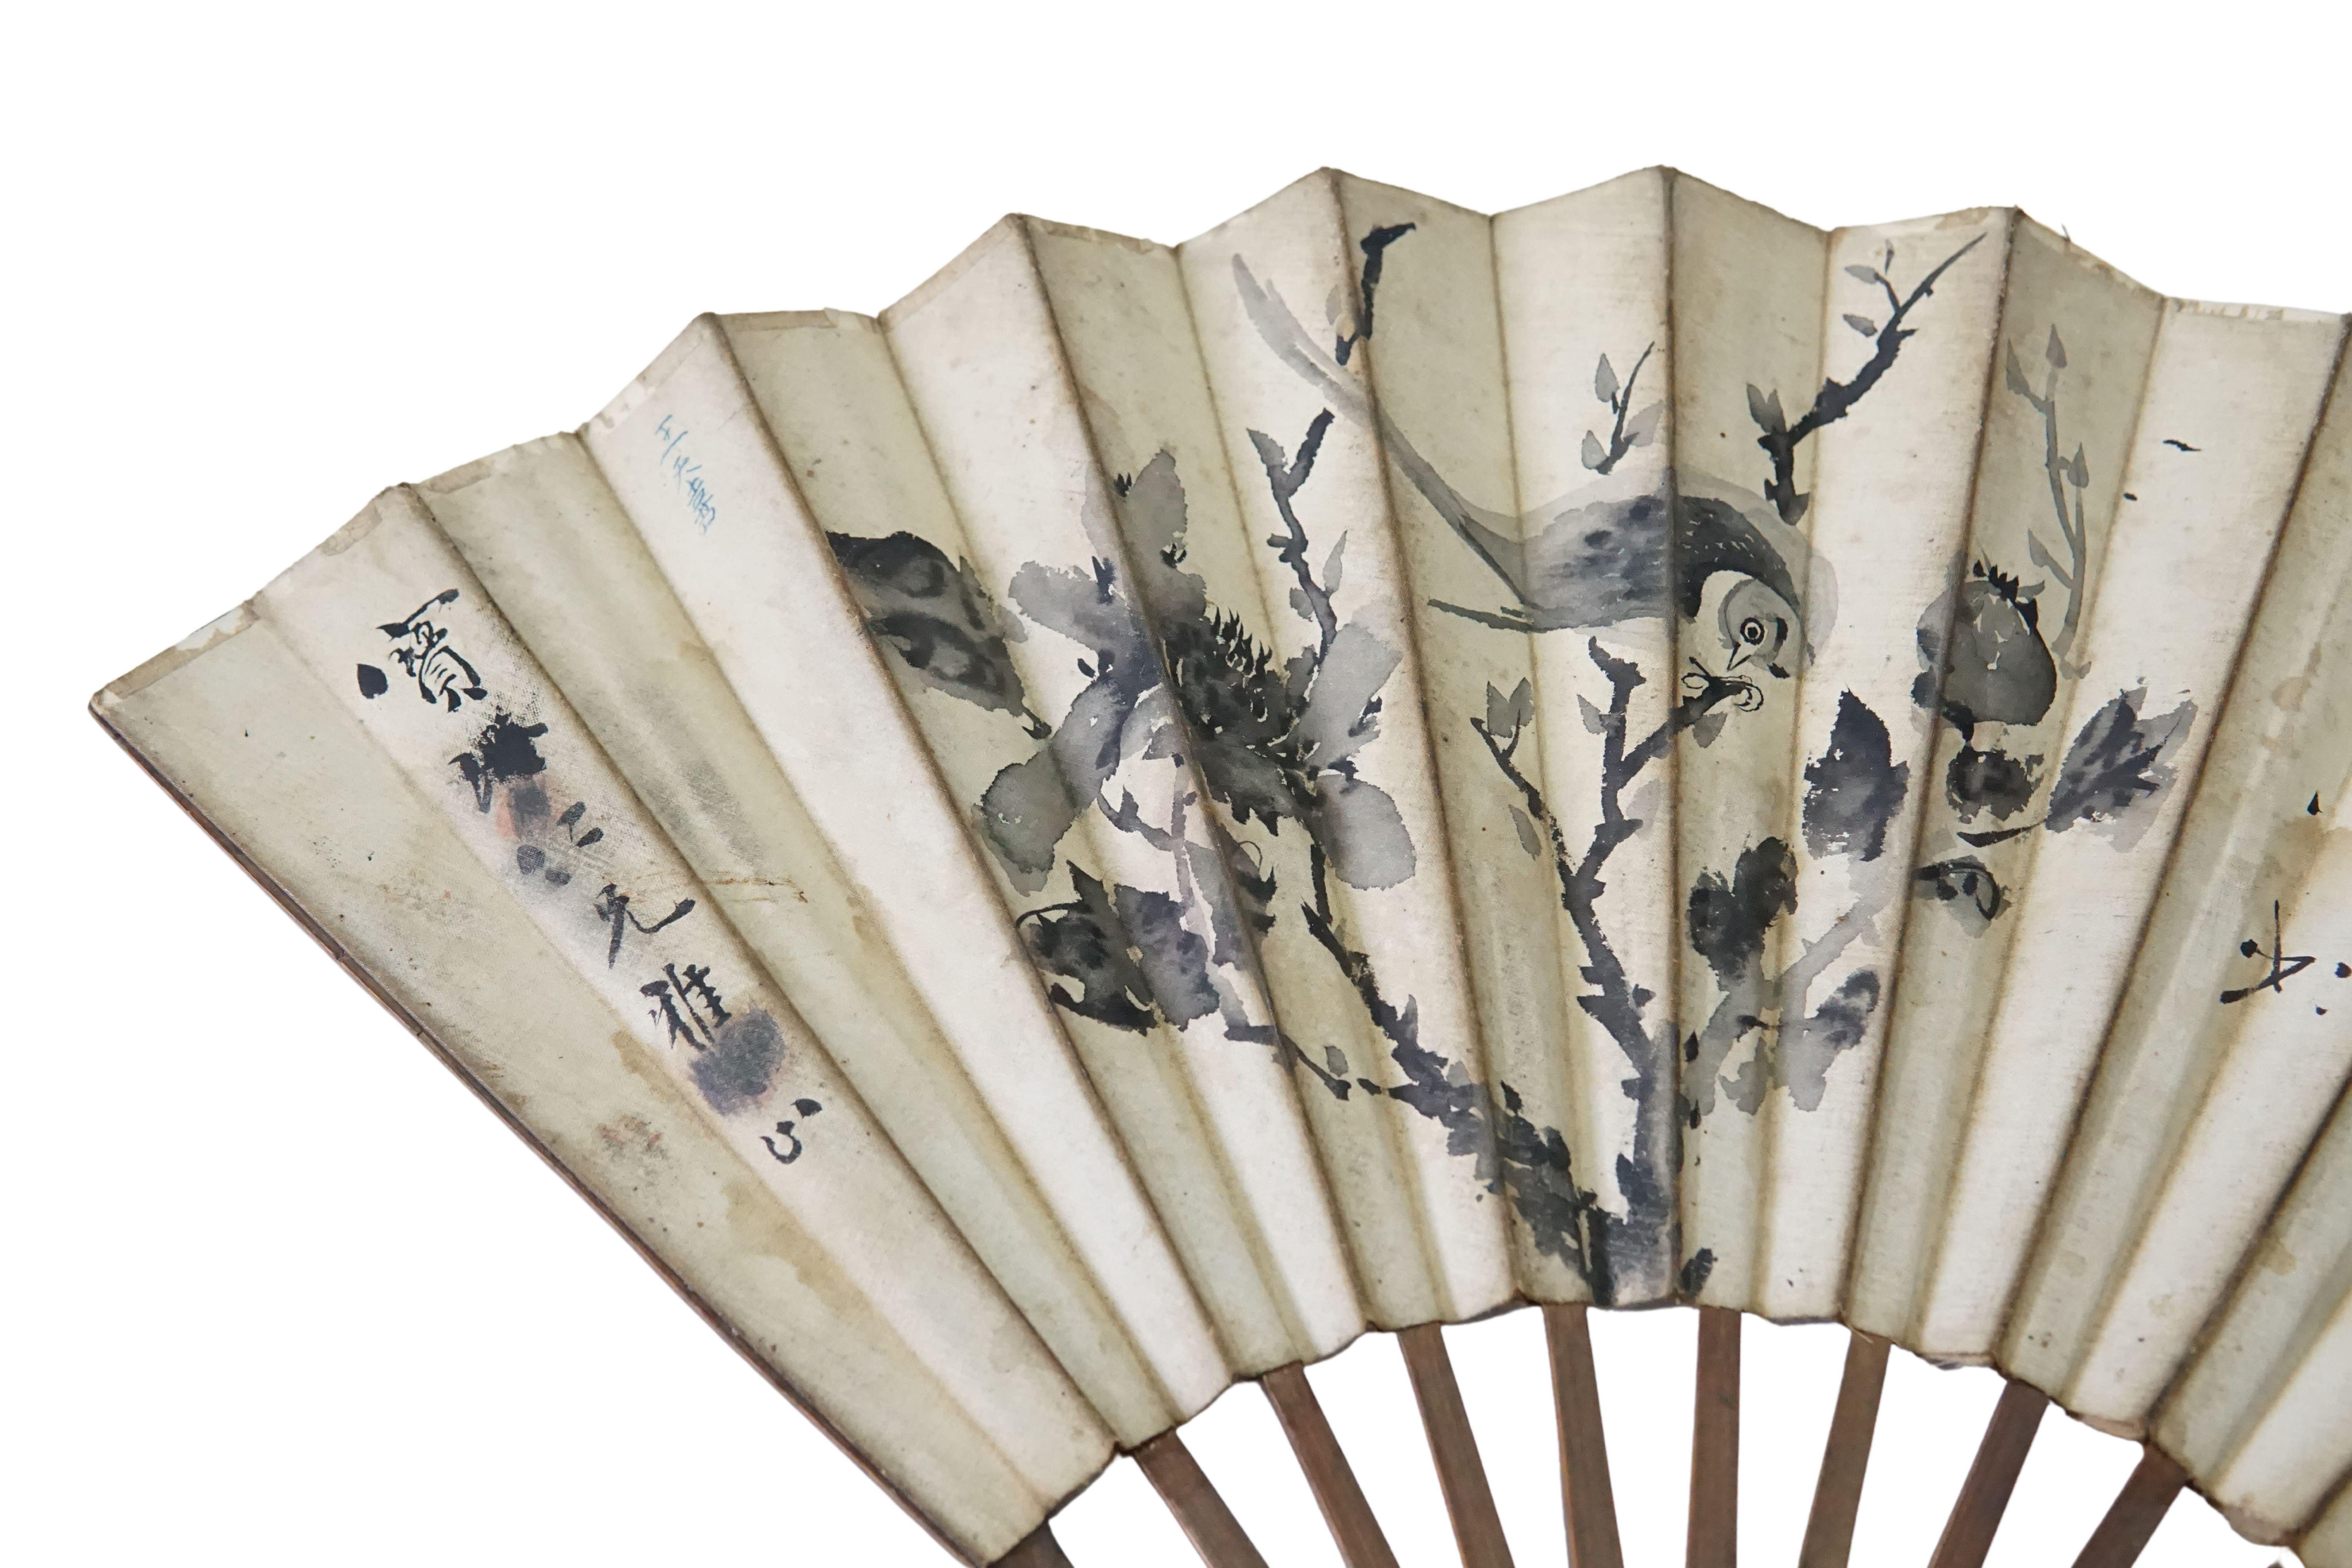 A Chinese hand-painted fan with hand-painted calligraphy (with two different drawing on either side). The fan's frame is crafted from bamboo and also includes wood engravings. The calligraphy features birds and hand-painted characters on one side &